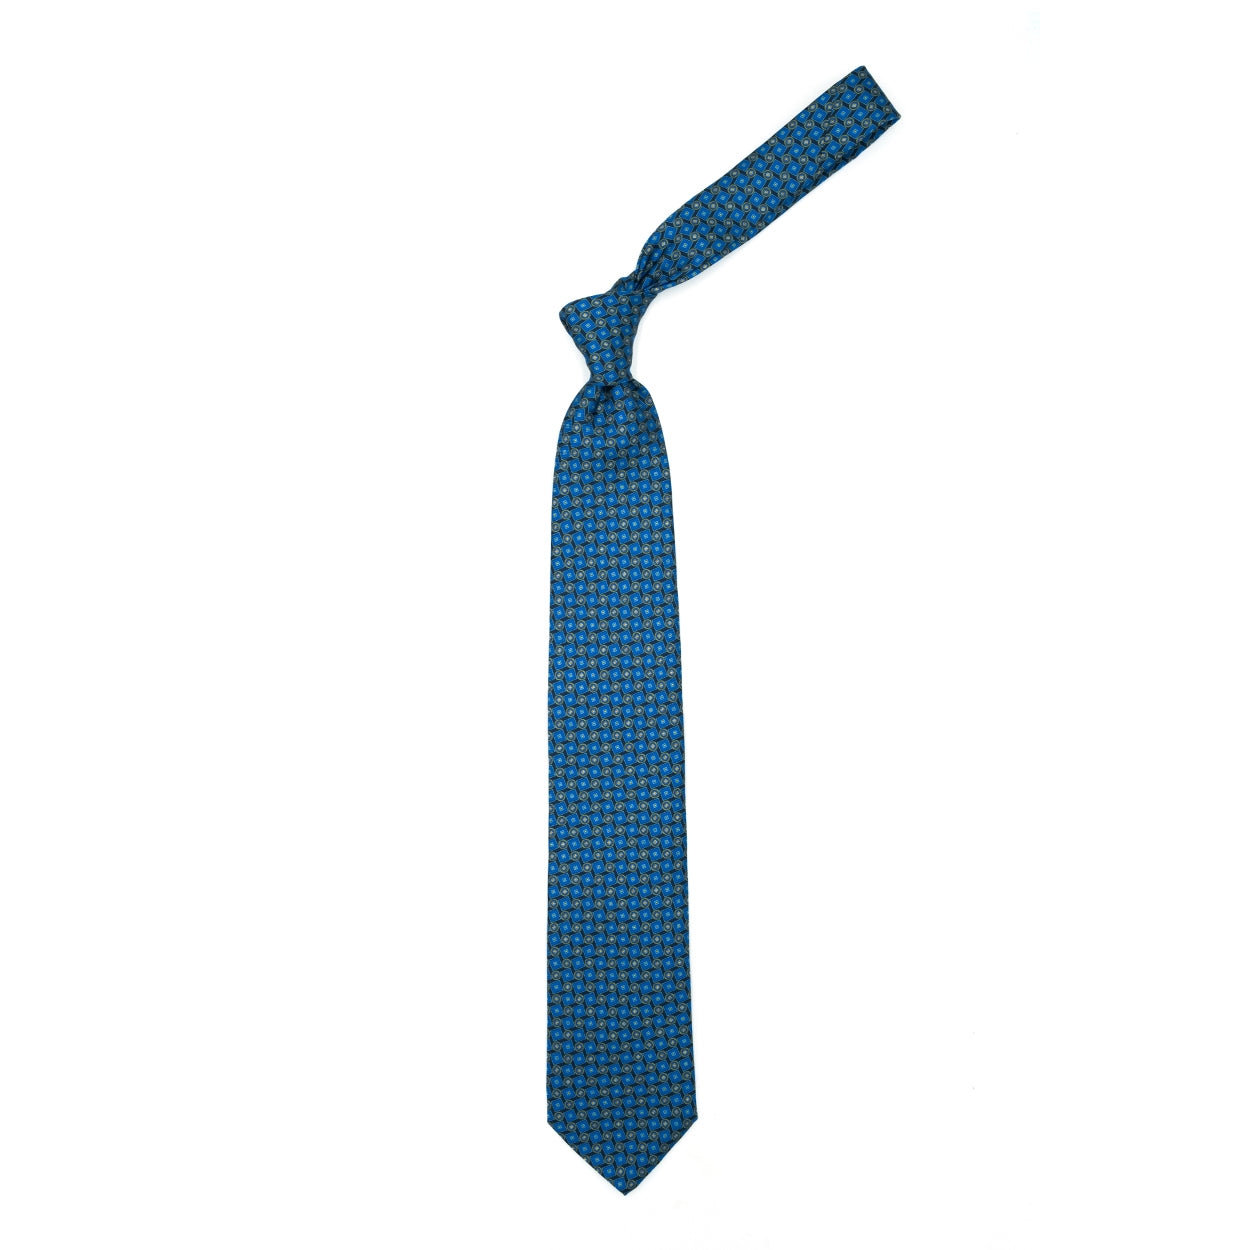 Blue tie with blue circles and squares